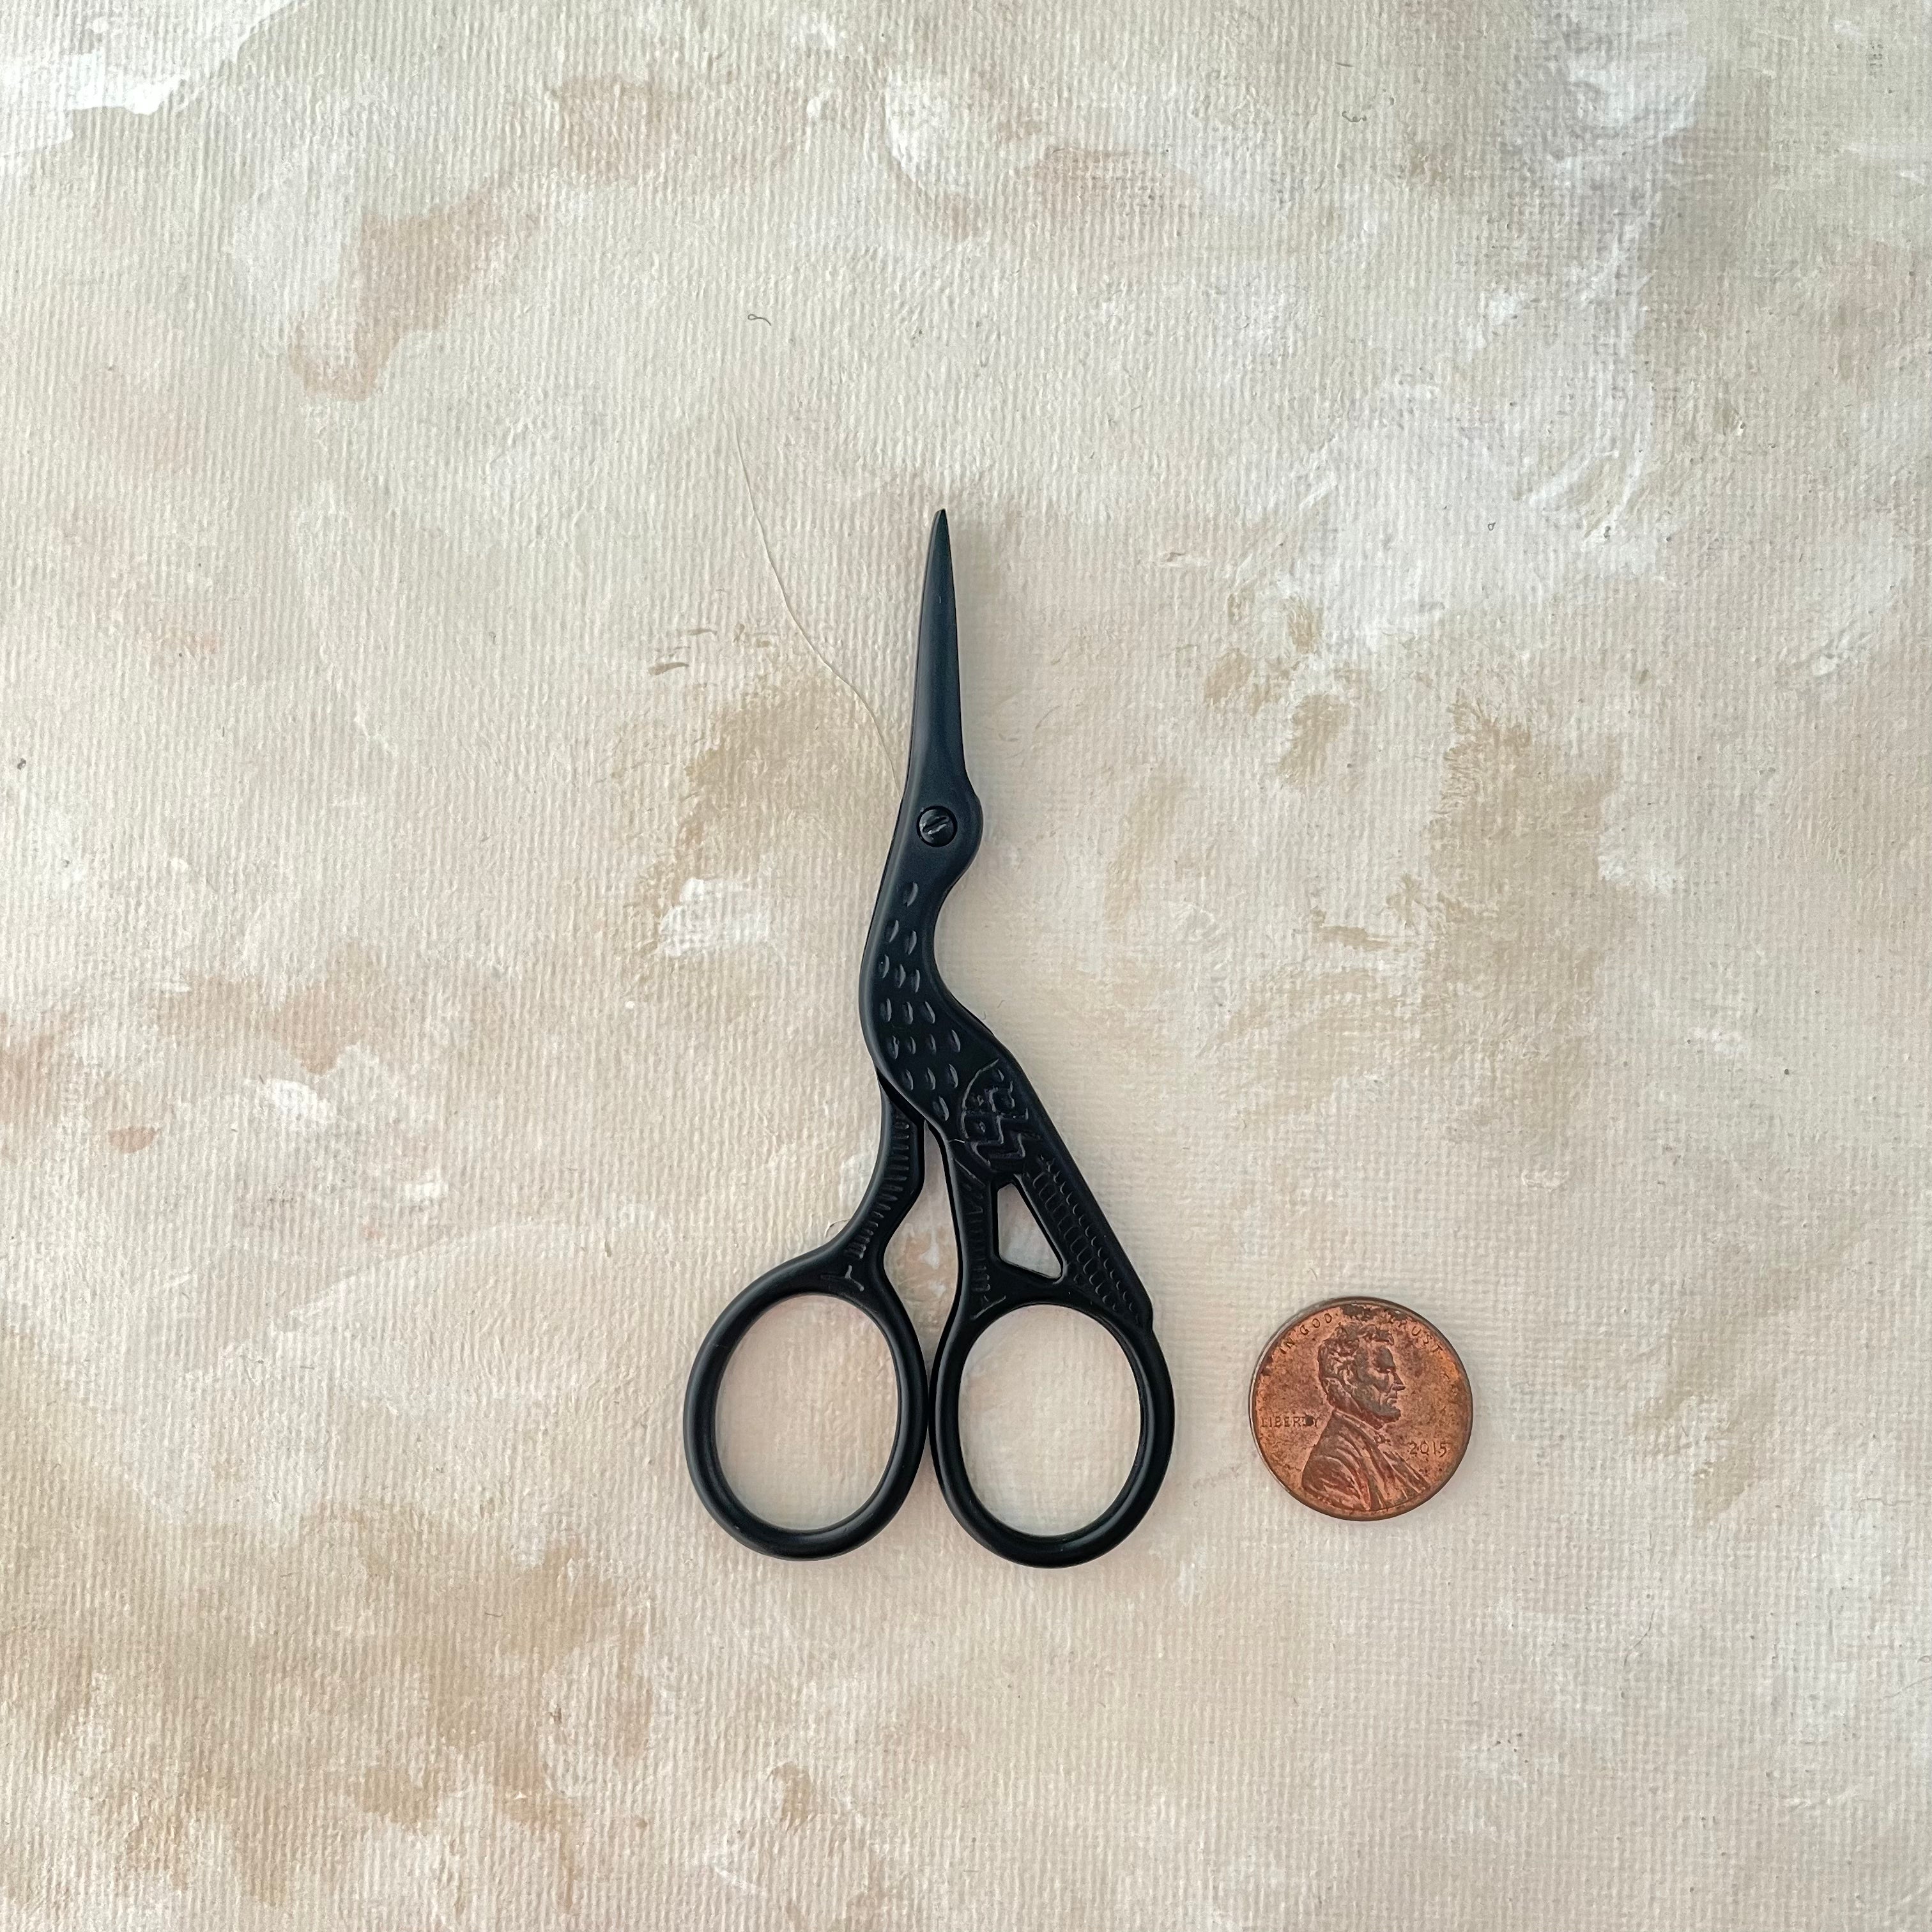 MATTE BLACK Crane Scissors: 3 ½” long x 1 5/8” at widest point -  Wedding Flat lay props from Champagne & GRIT